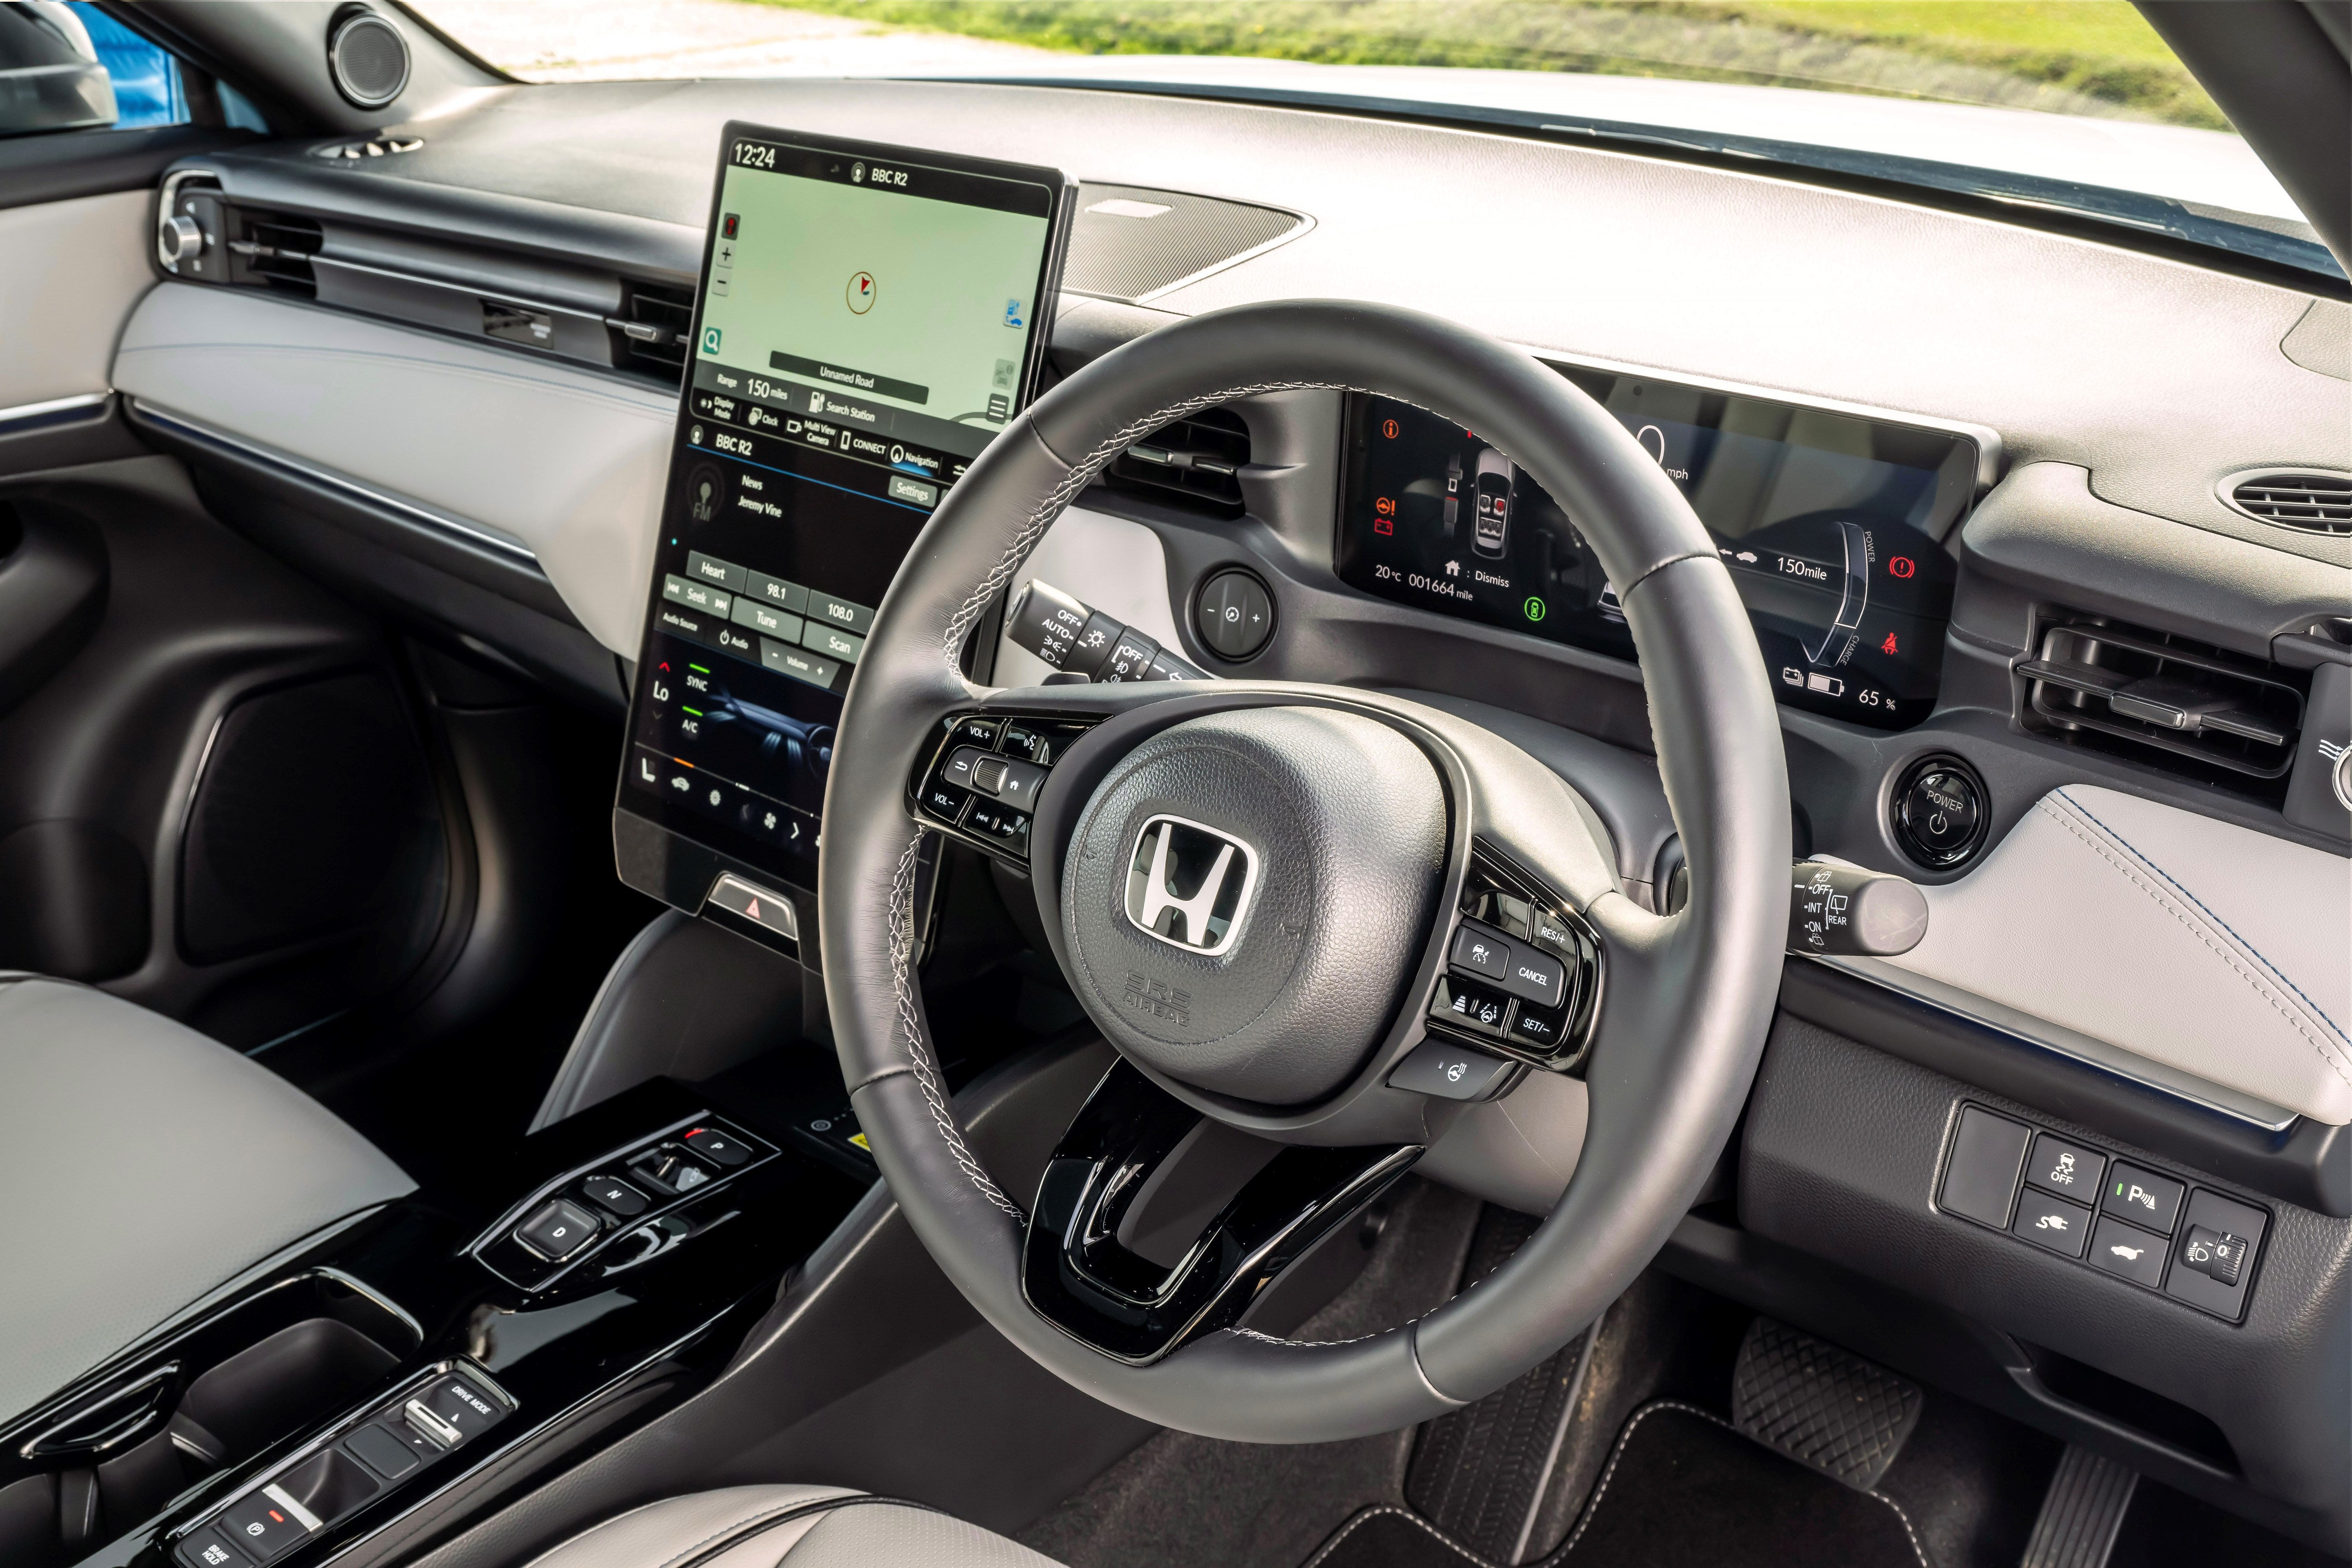 As with other electric cars, the Honda e:Ny1 Advantage has a central touchscreen that controls a lot of the vehicle’s functionality